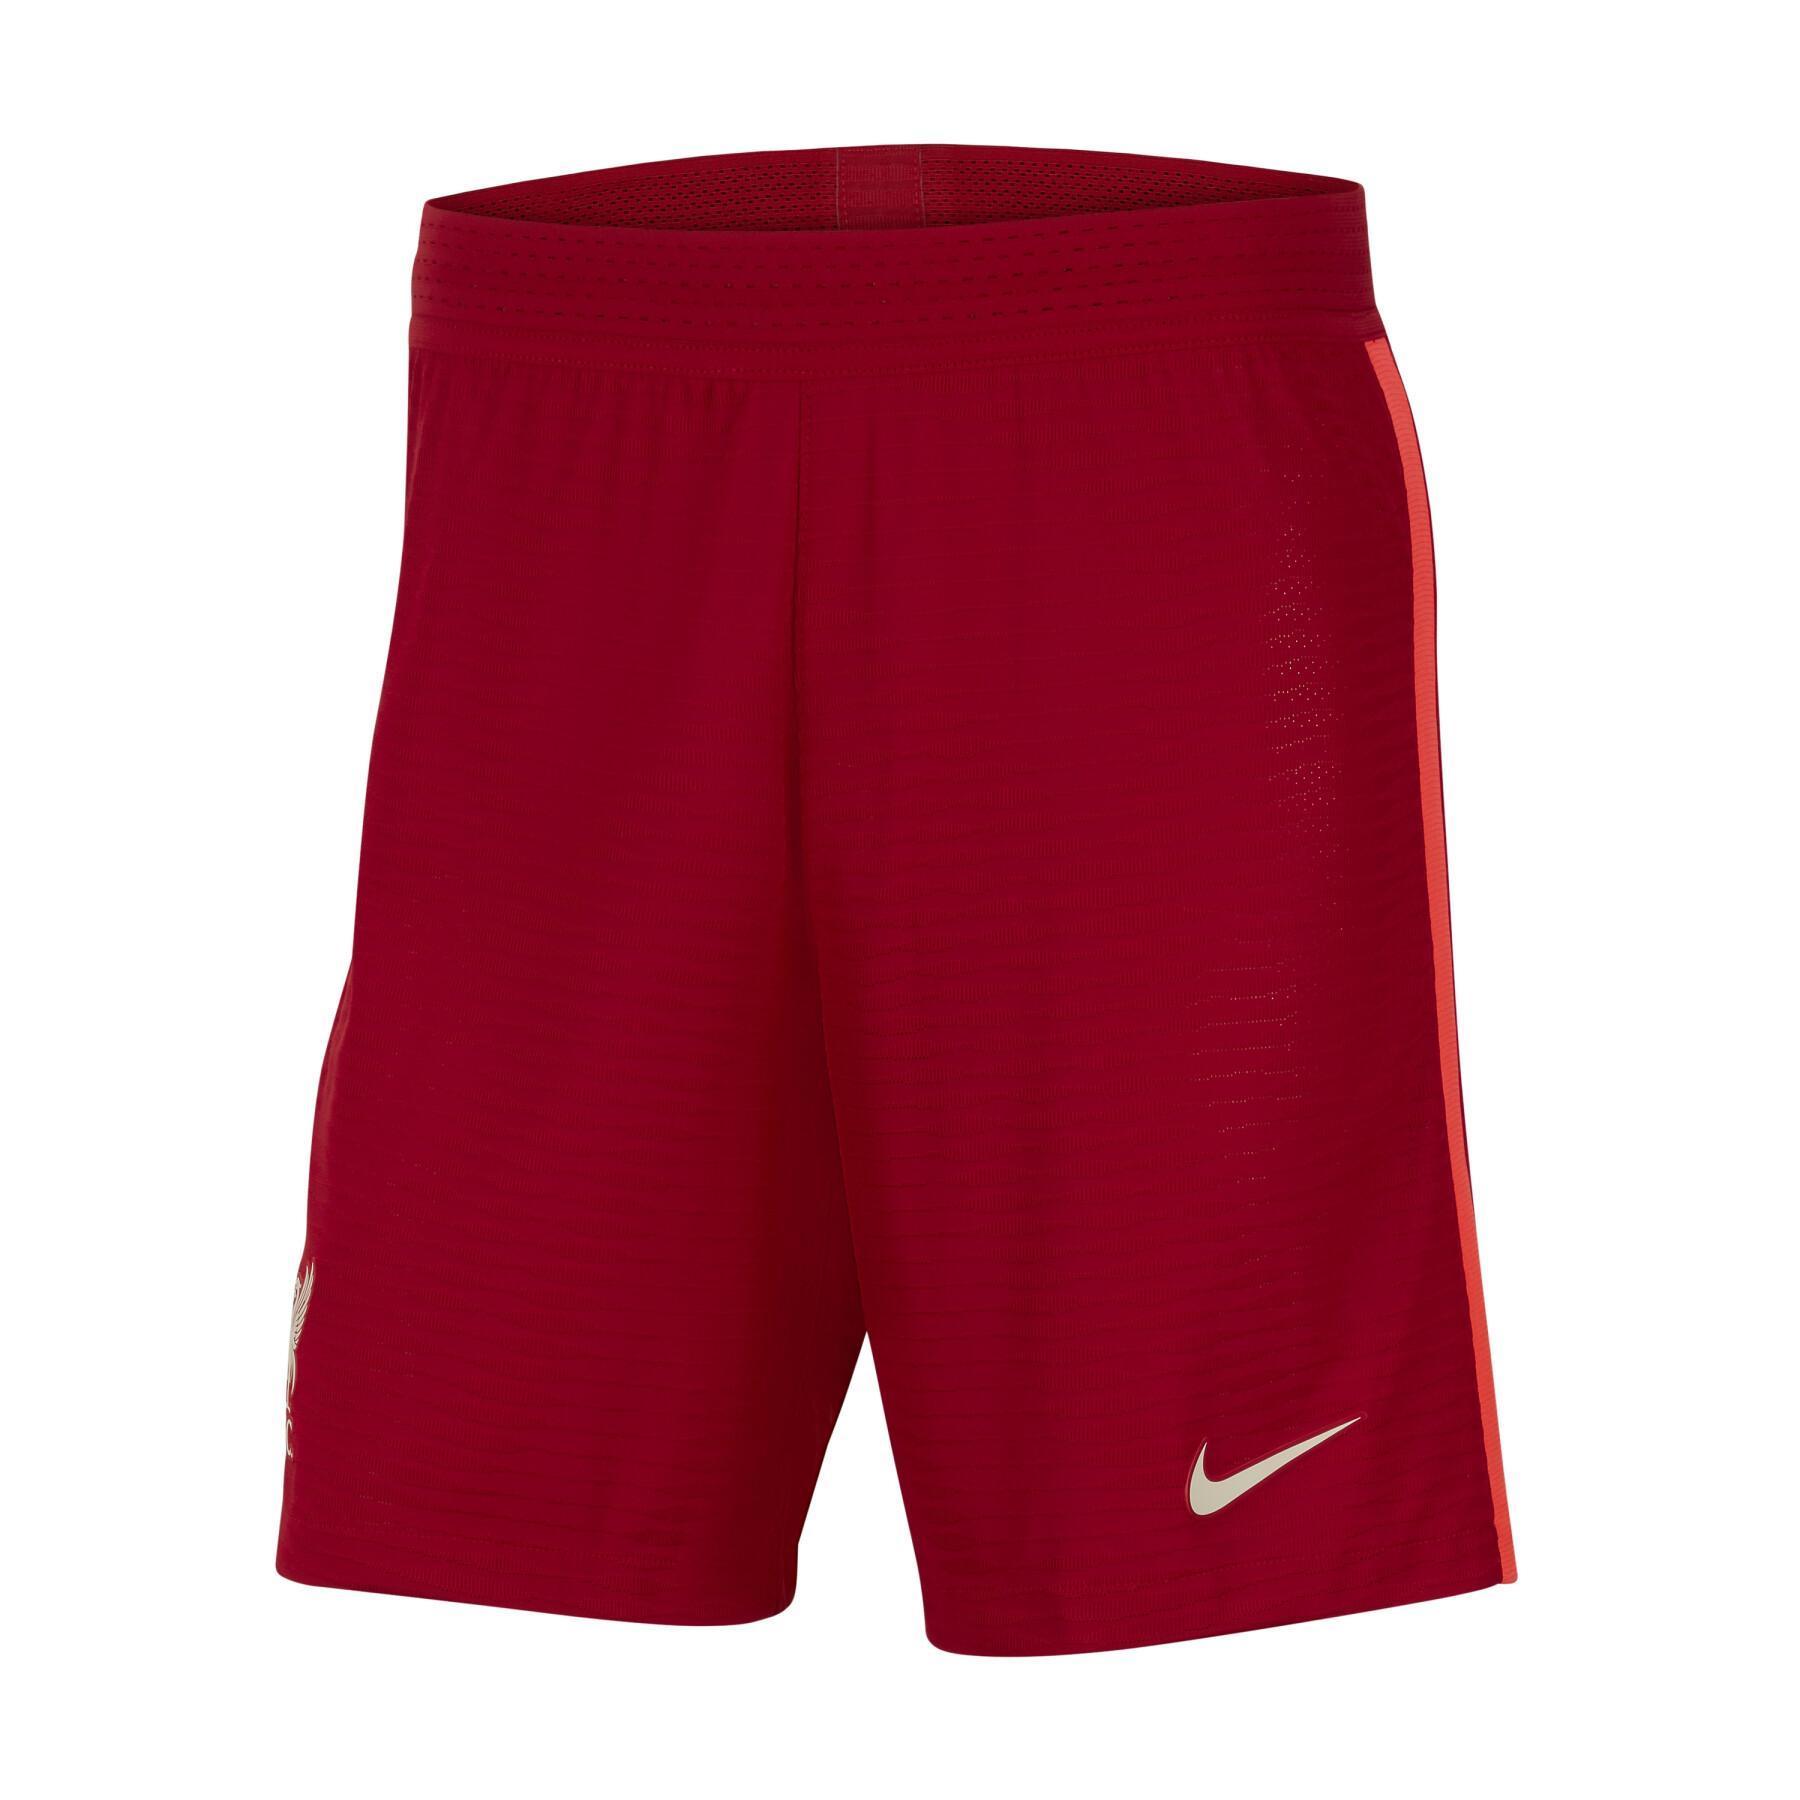 Authentic home shorts Liverpool FC 2021/22